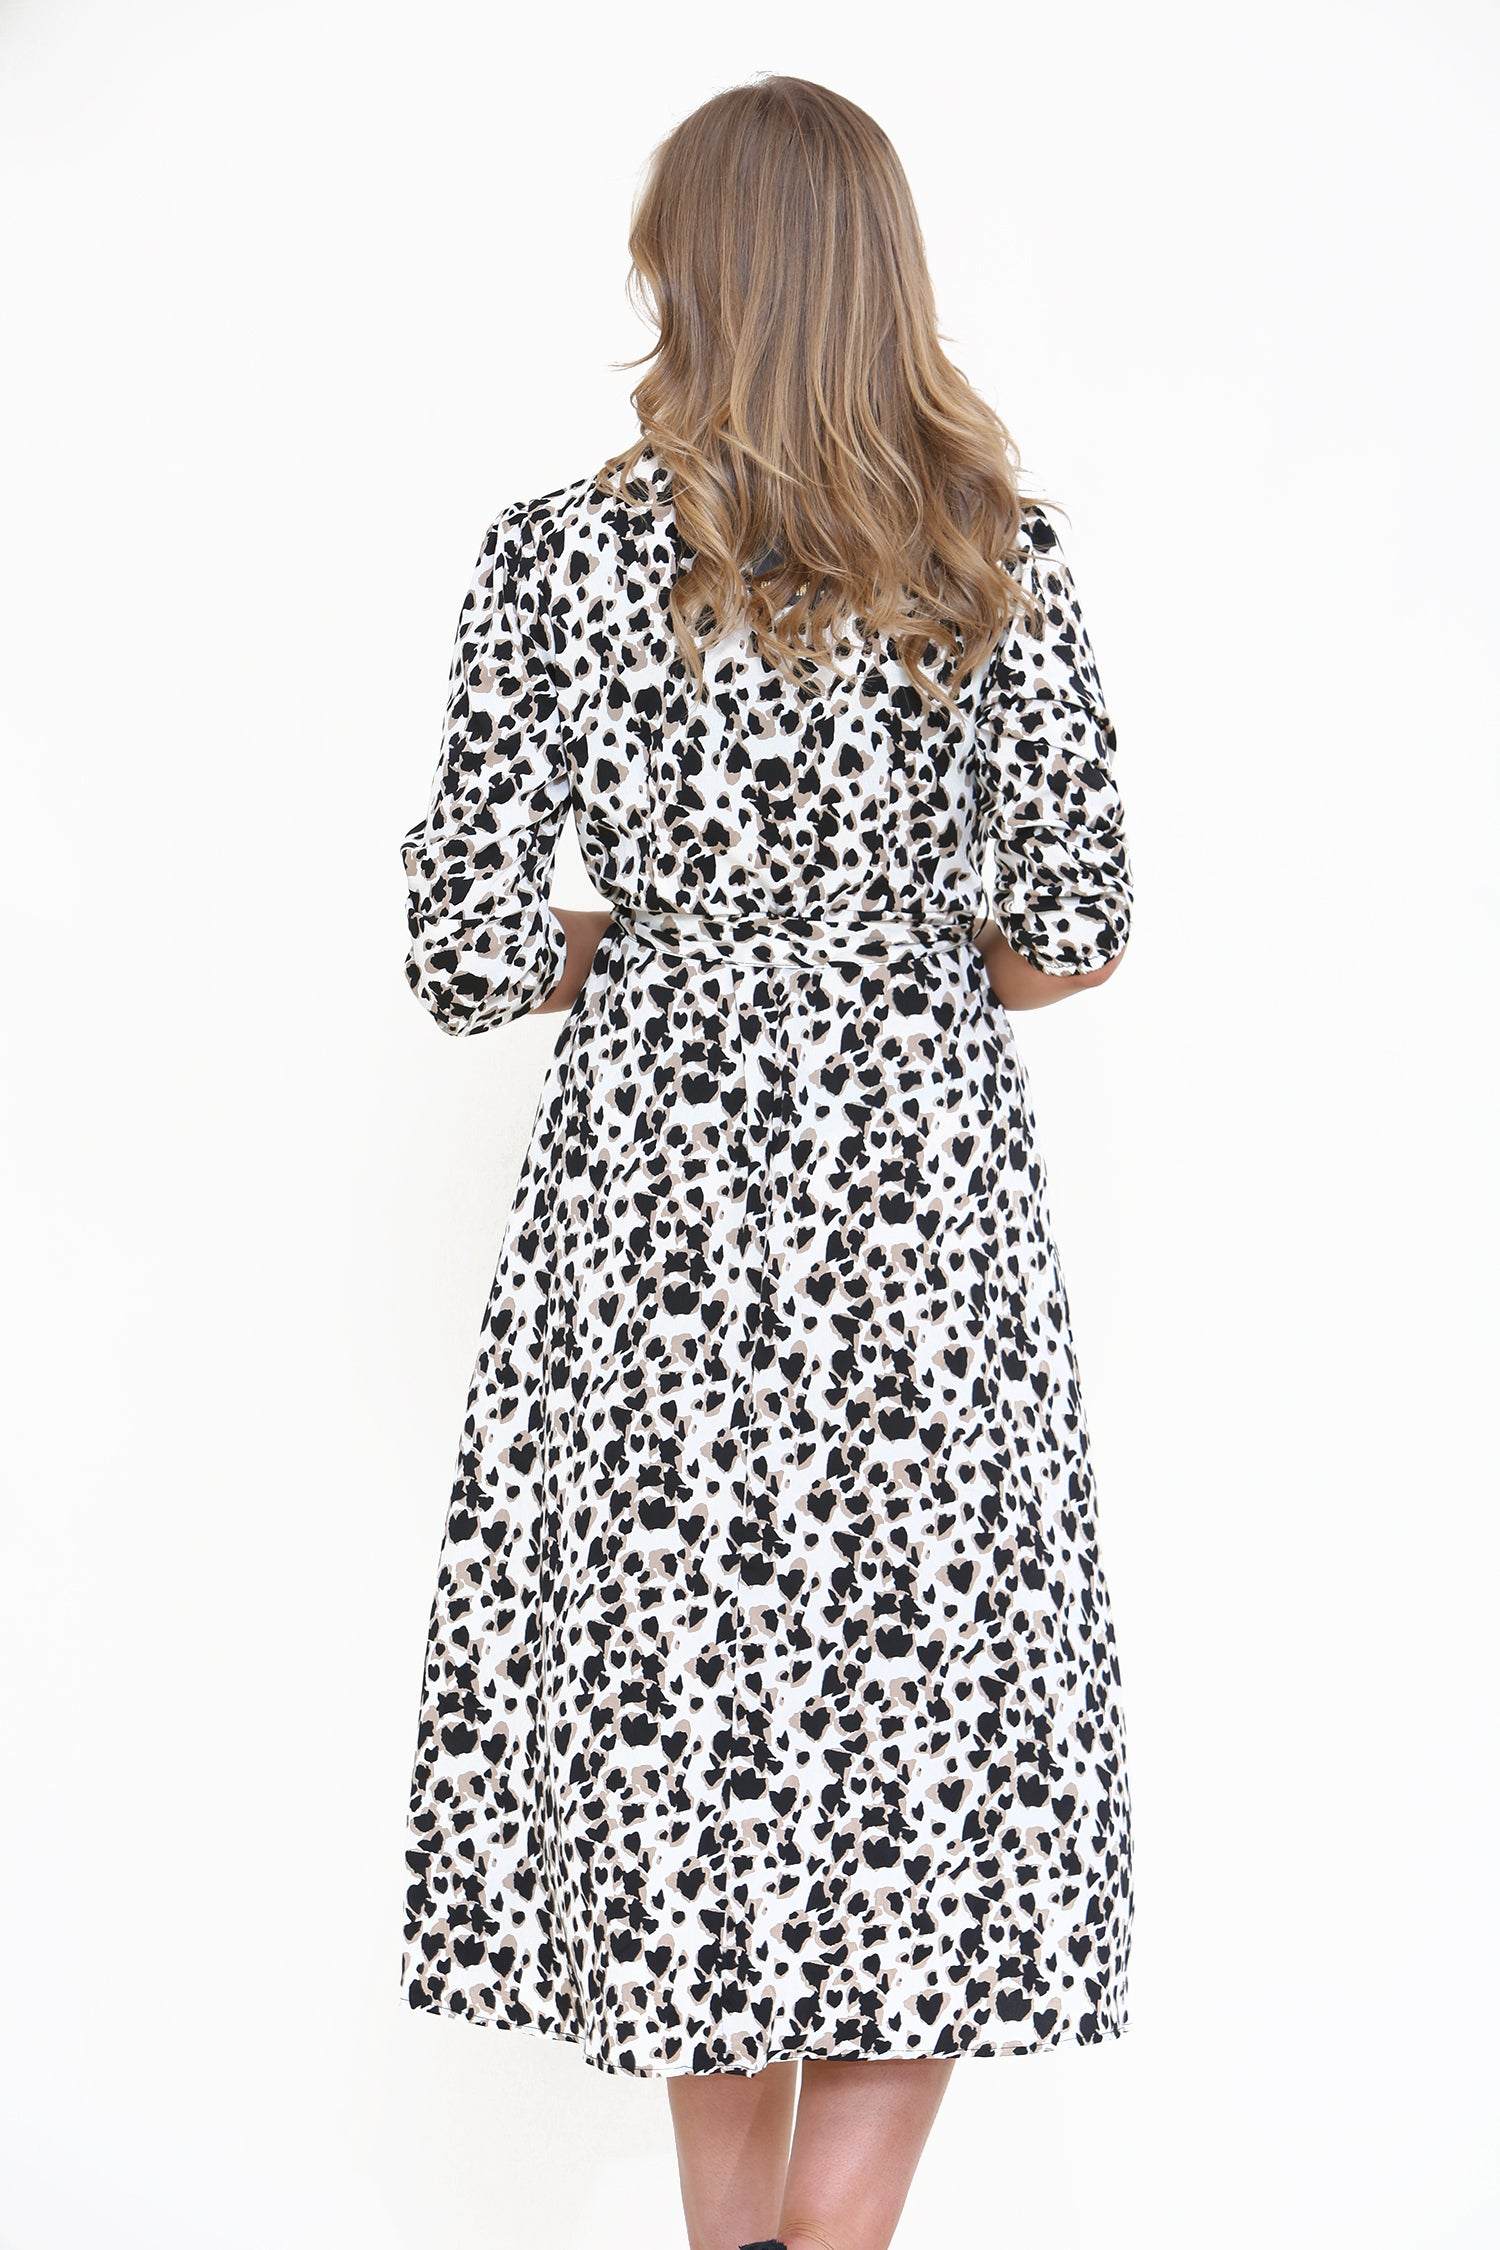 Love Sunshine White Leopard Printed Wrapped Midaxi Dress LS-2258